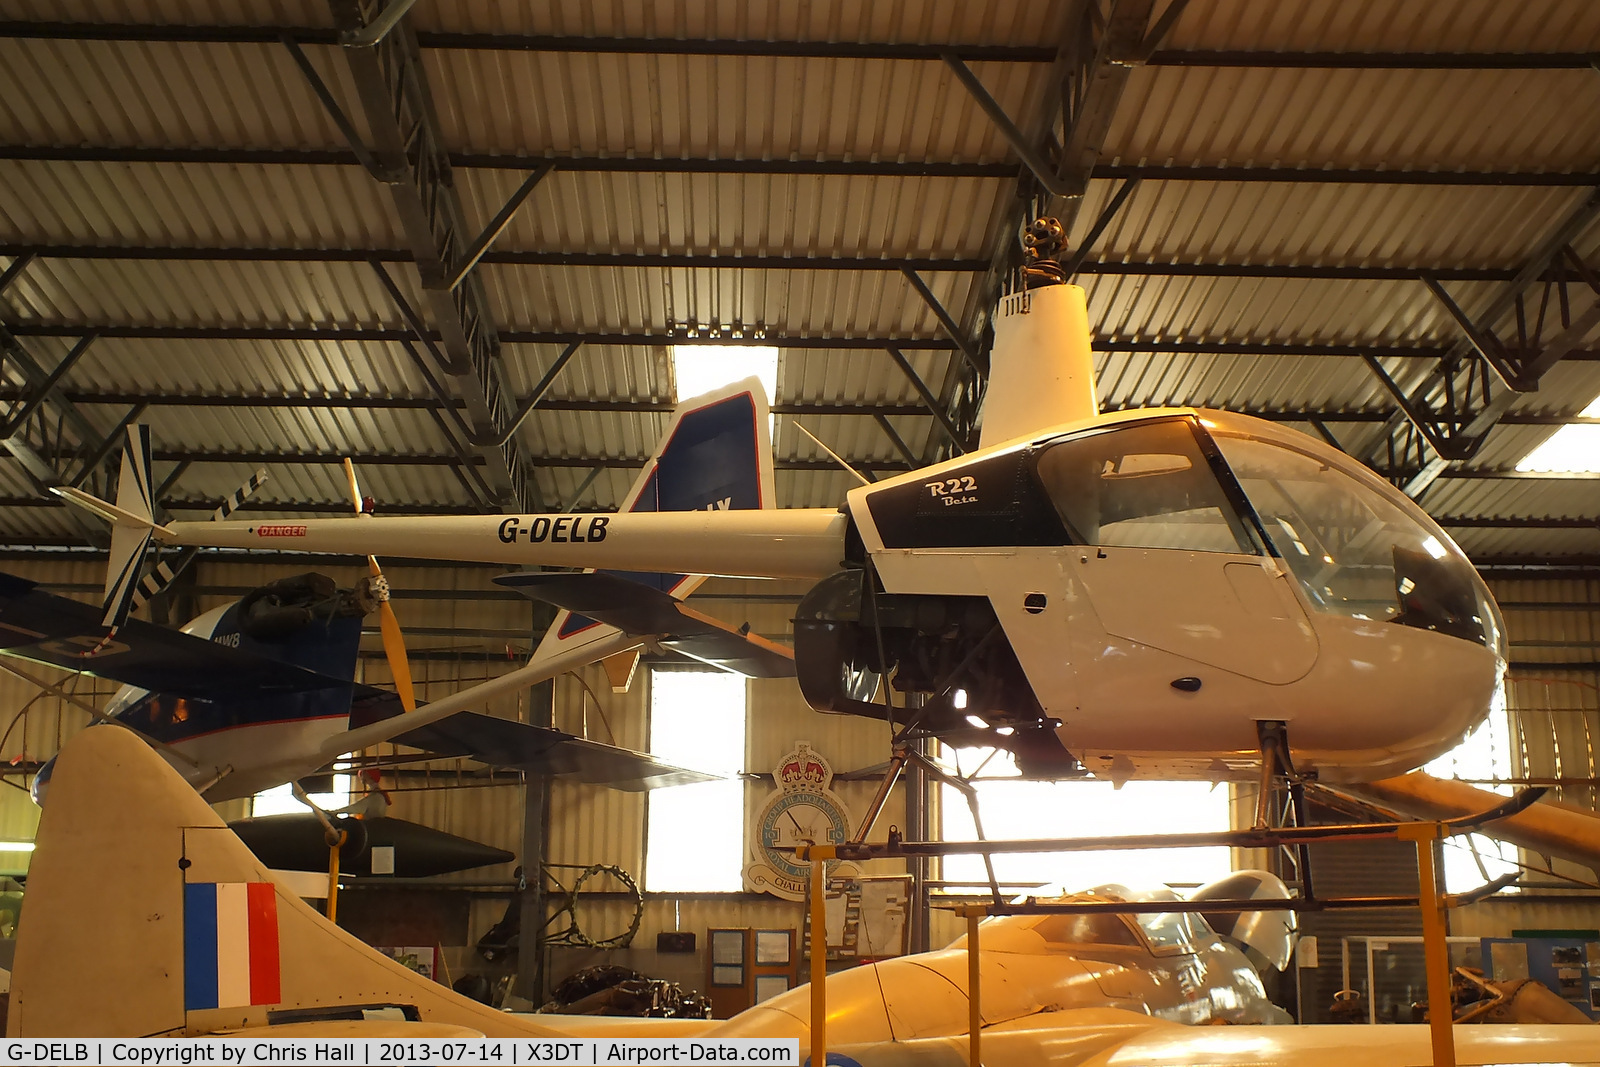 G-DELB, 1988 Robinson R22 Beta C/N 0799, preserved at the South Yorkshire Aircraft Museum, AeroVenture, Doncaster